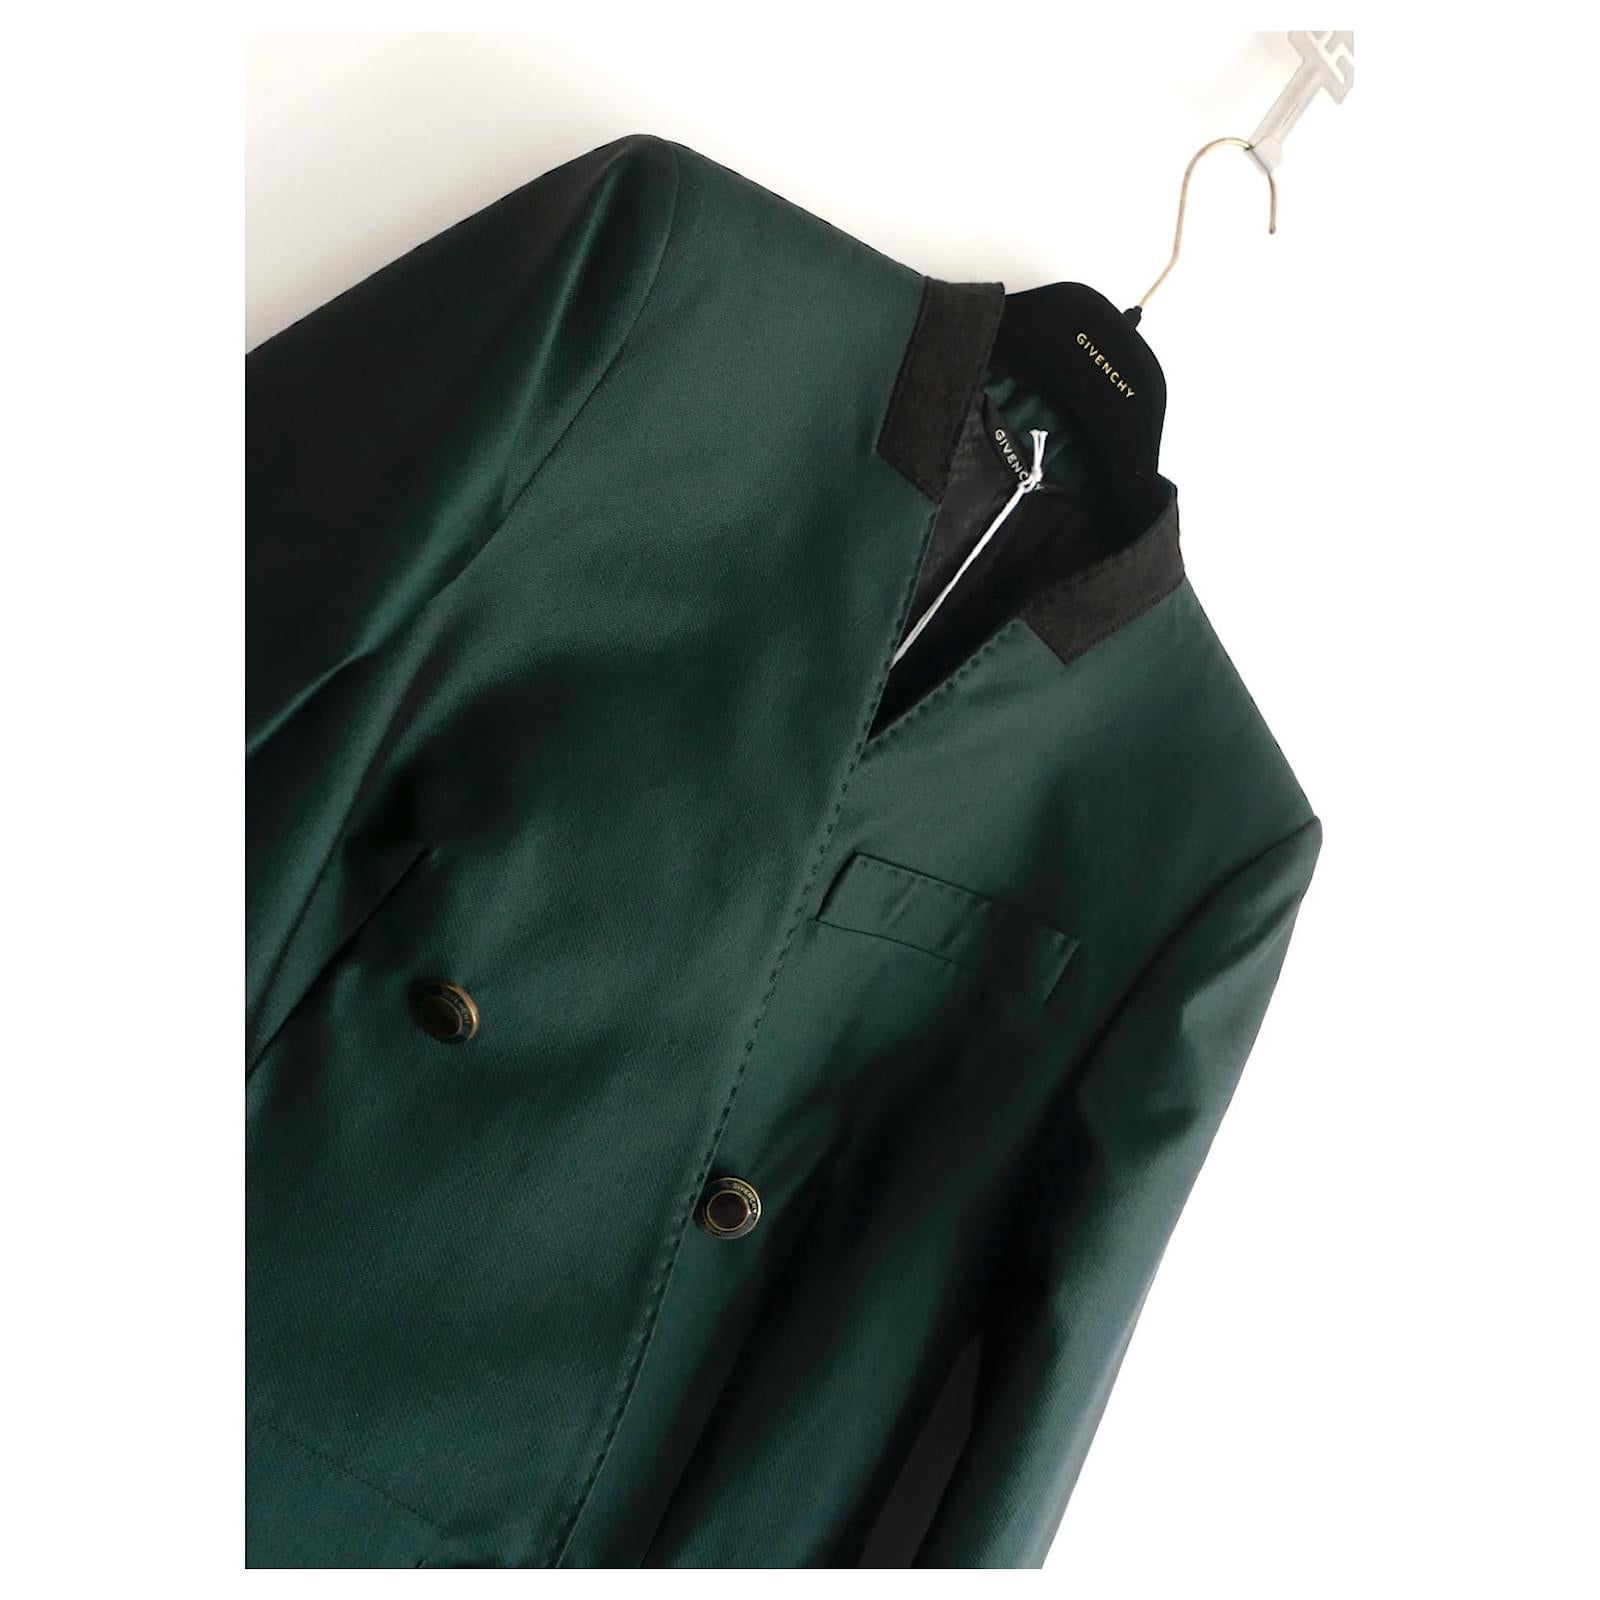 Impeccably tailored Givenchy bottle green wool and silk blazer jacket from Clare Waight Keller's SS20 collection. Look 46 on the runway. Bought for $2900 and unworn with tag/spare buttons and Givenchy hanger. Superbly structured with padded